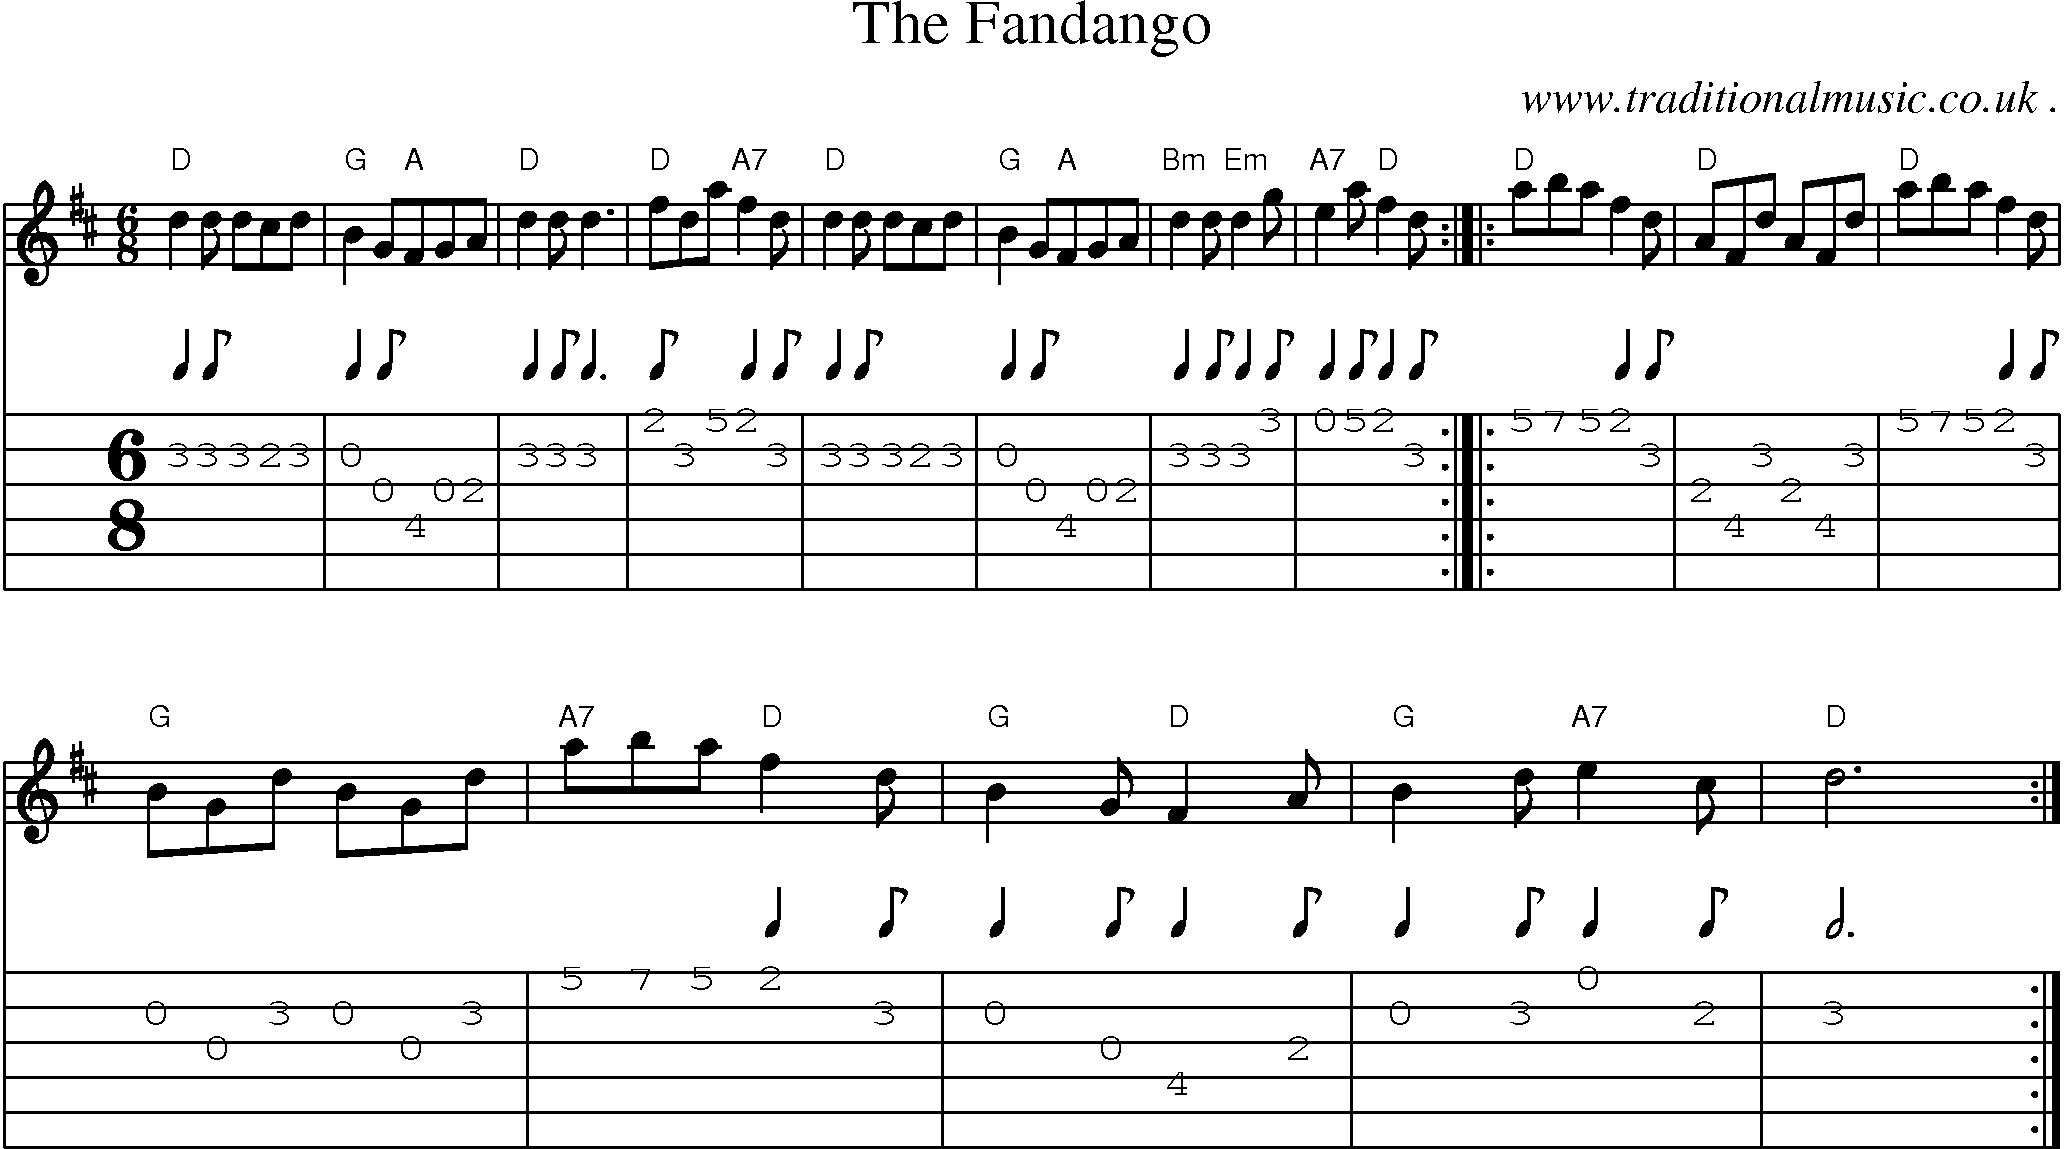 Sheet-Music and Guitar Tabs for The Fandango